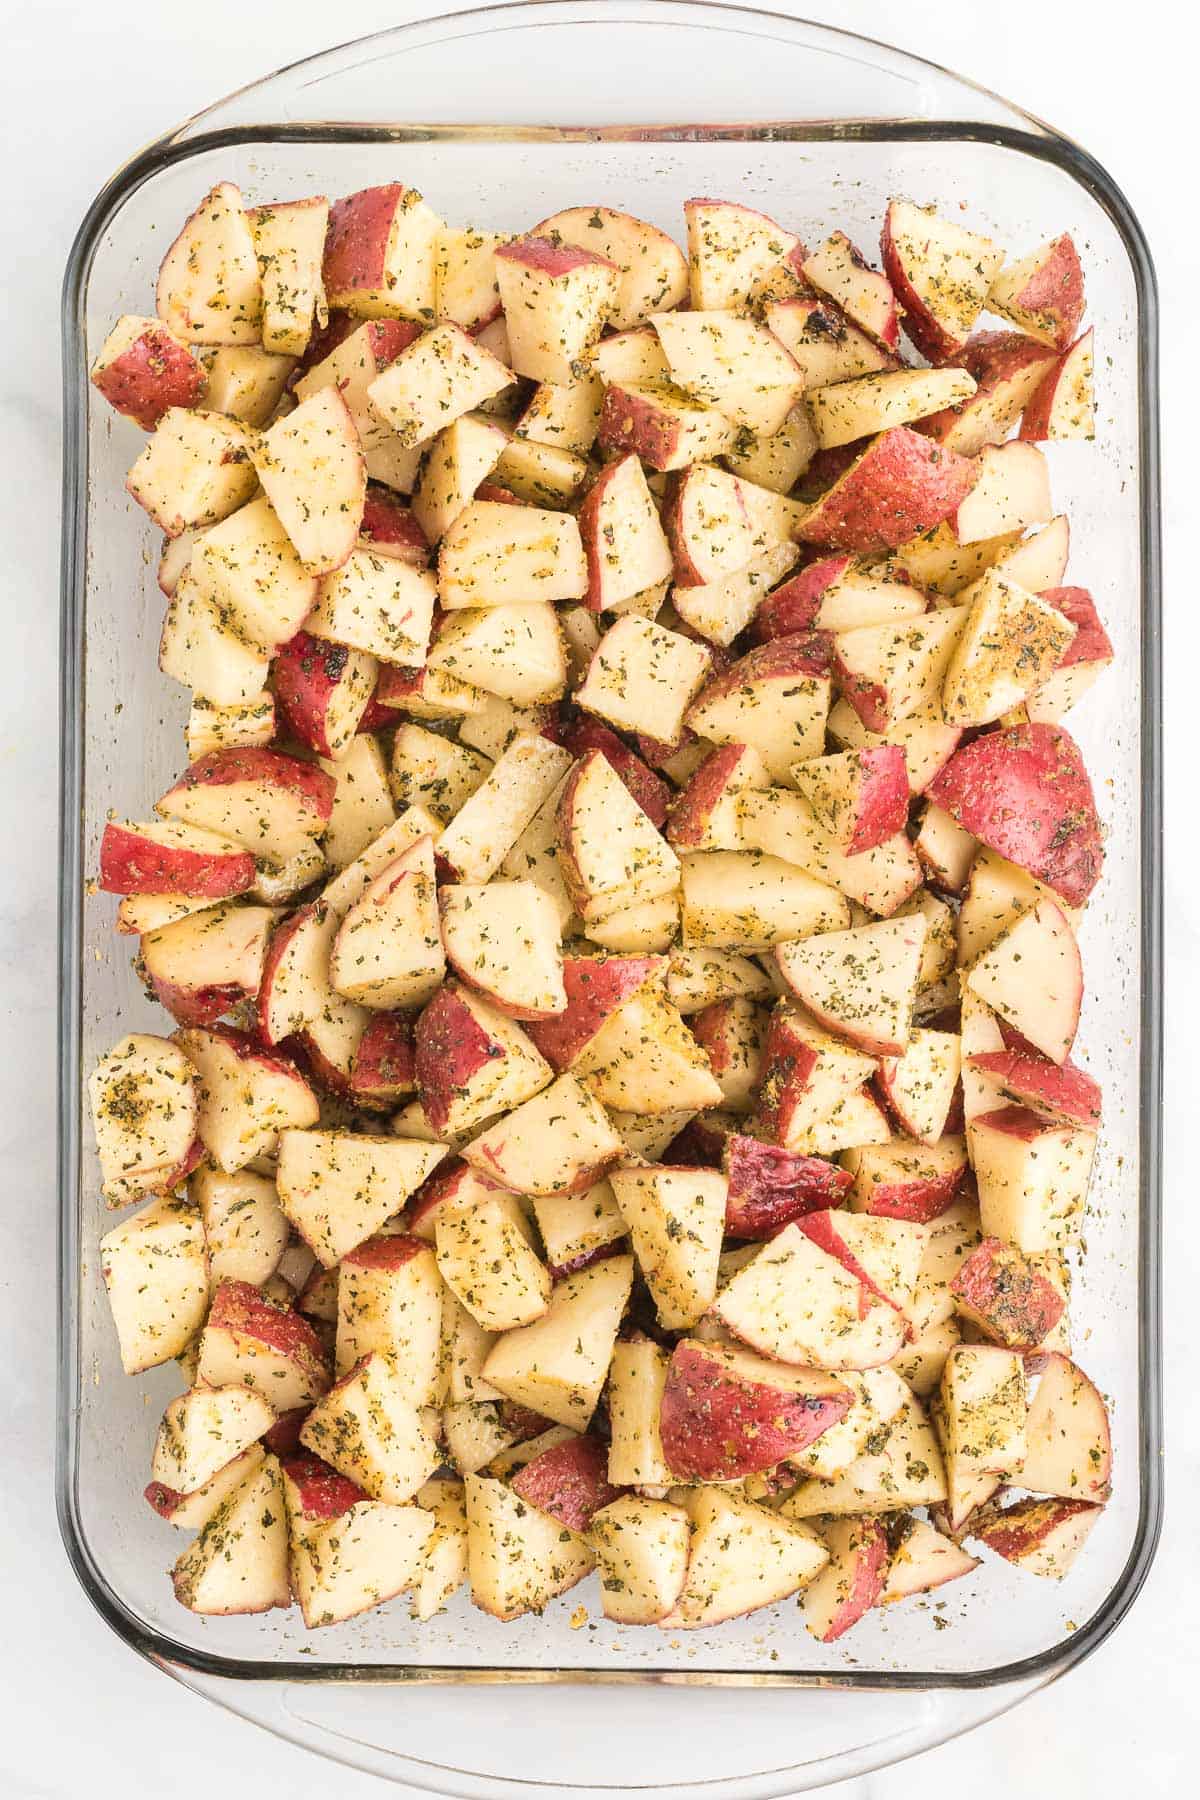 diced red potatoes mixed with spices and oil in a baking dish